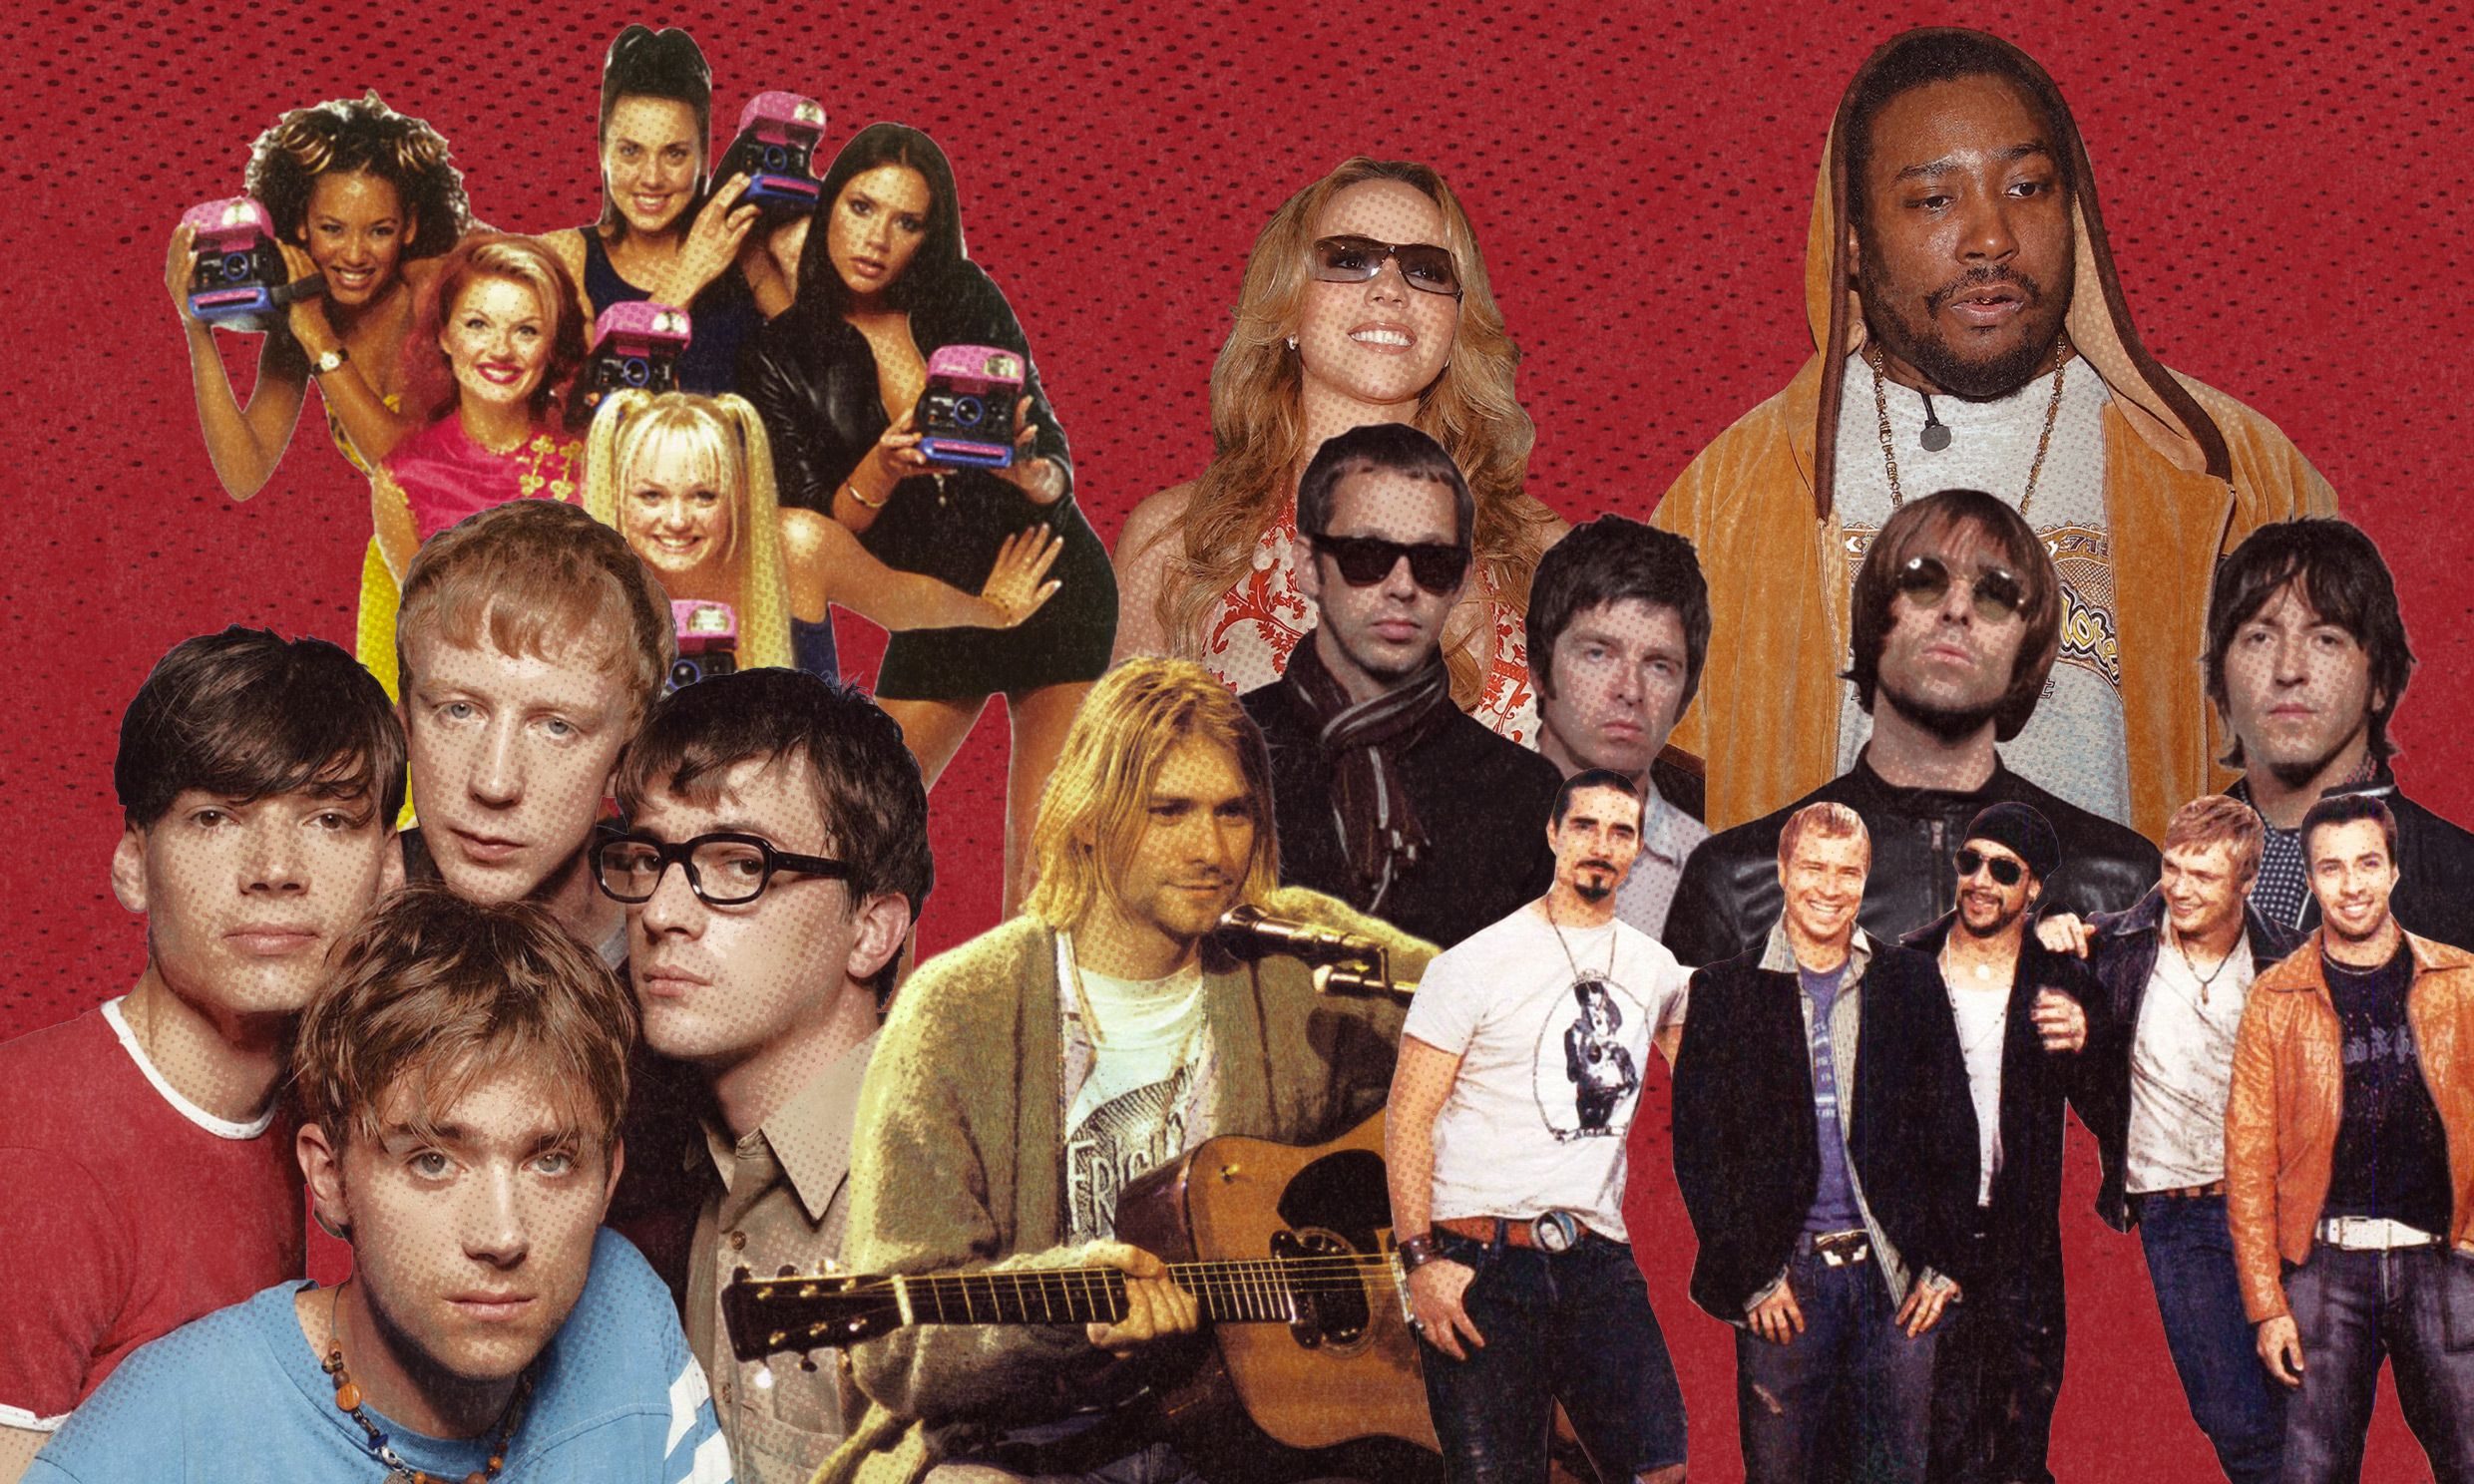 Can You Guess These Underrated Bands From the 90's? Trivia Quiz